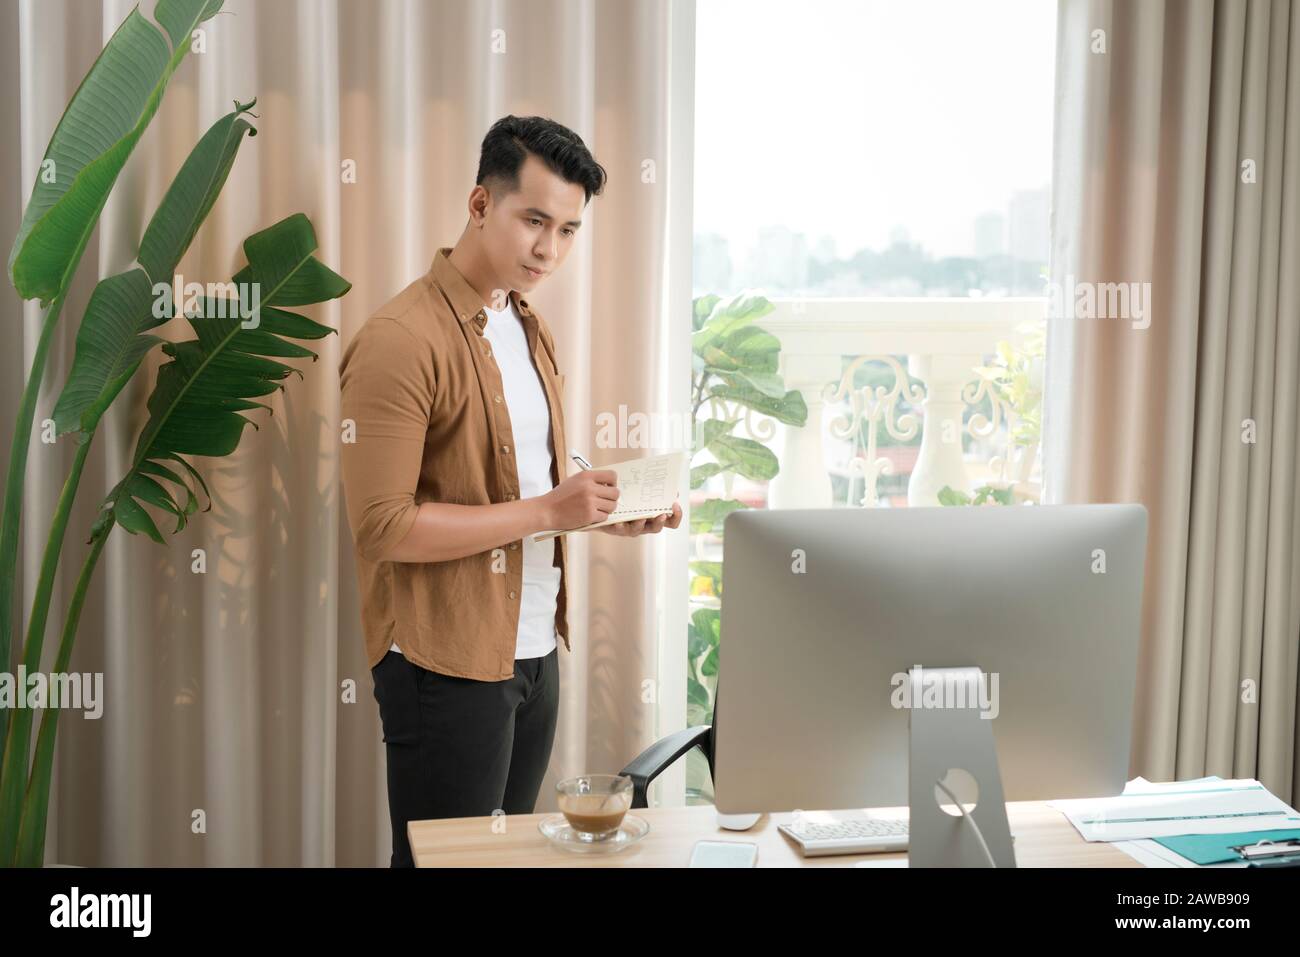 Asian executive aged 25-35 at the desk. He is thinking of a new marketing plan carefully. Stock Photo